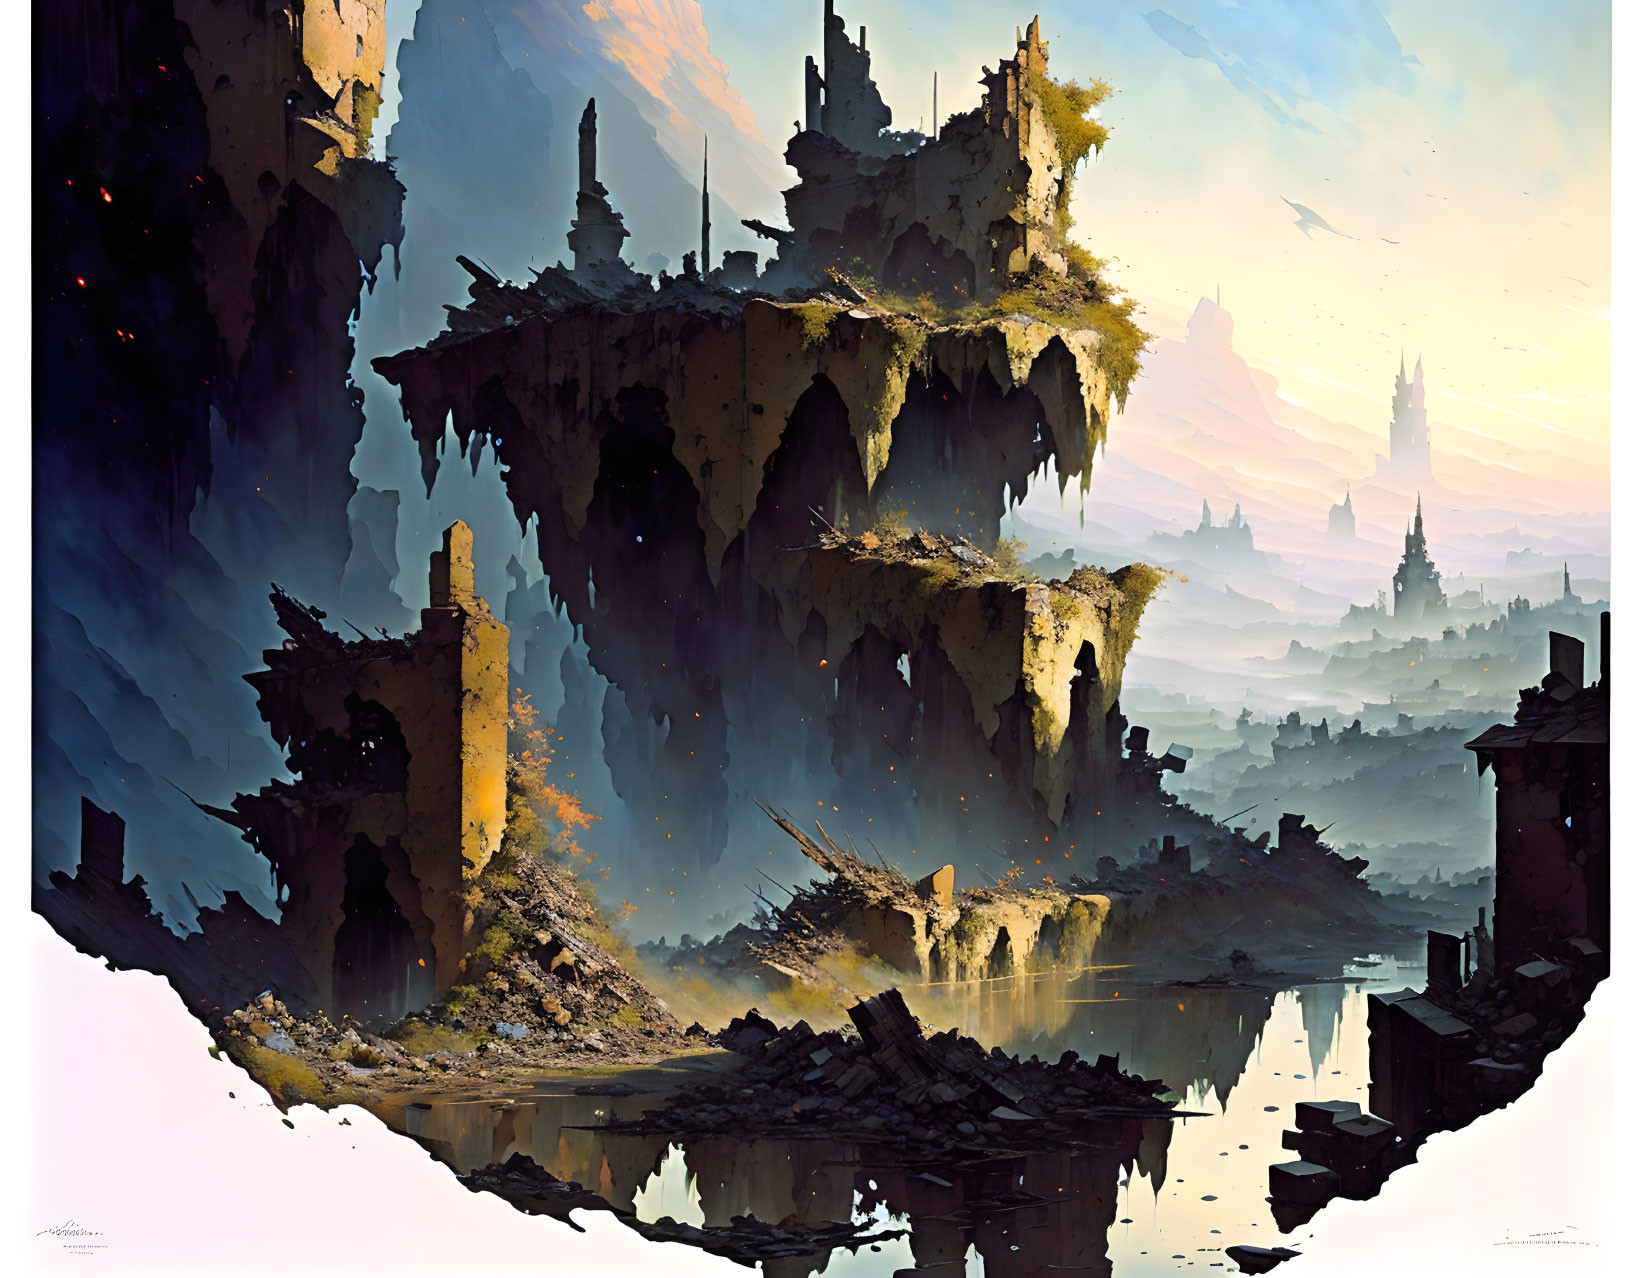 Fantastical landscape with towering spires and ancient structures by tranquil water